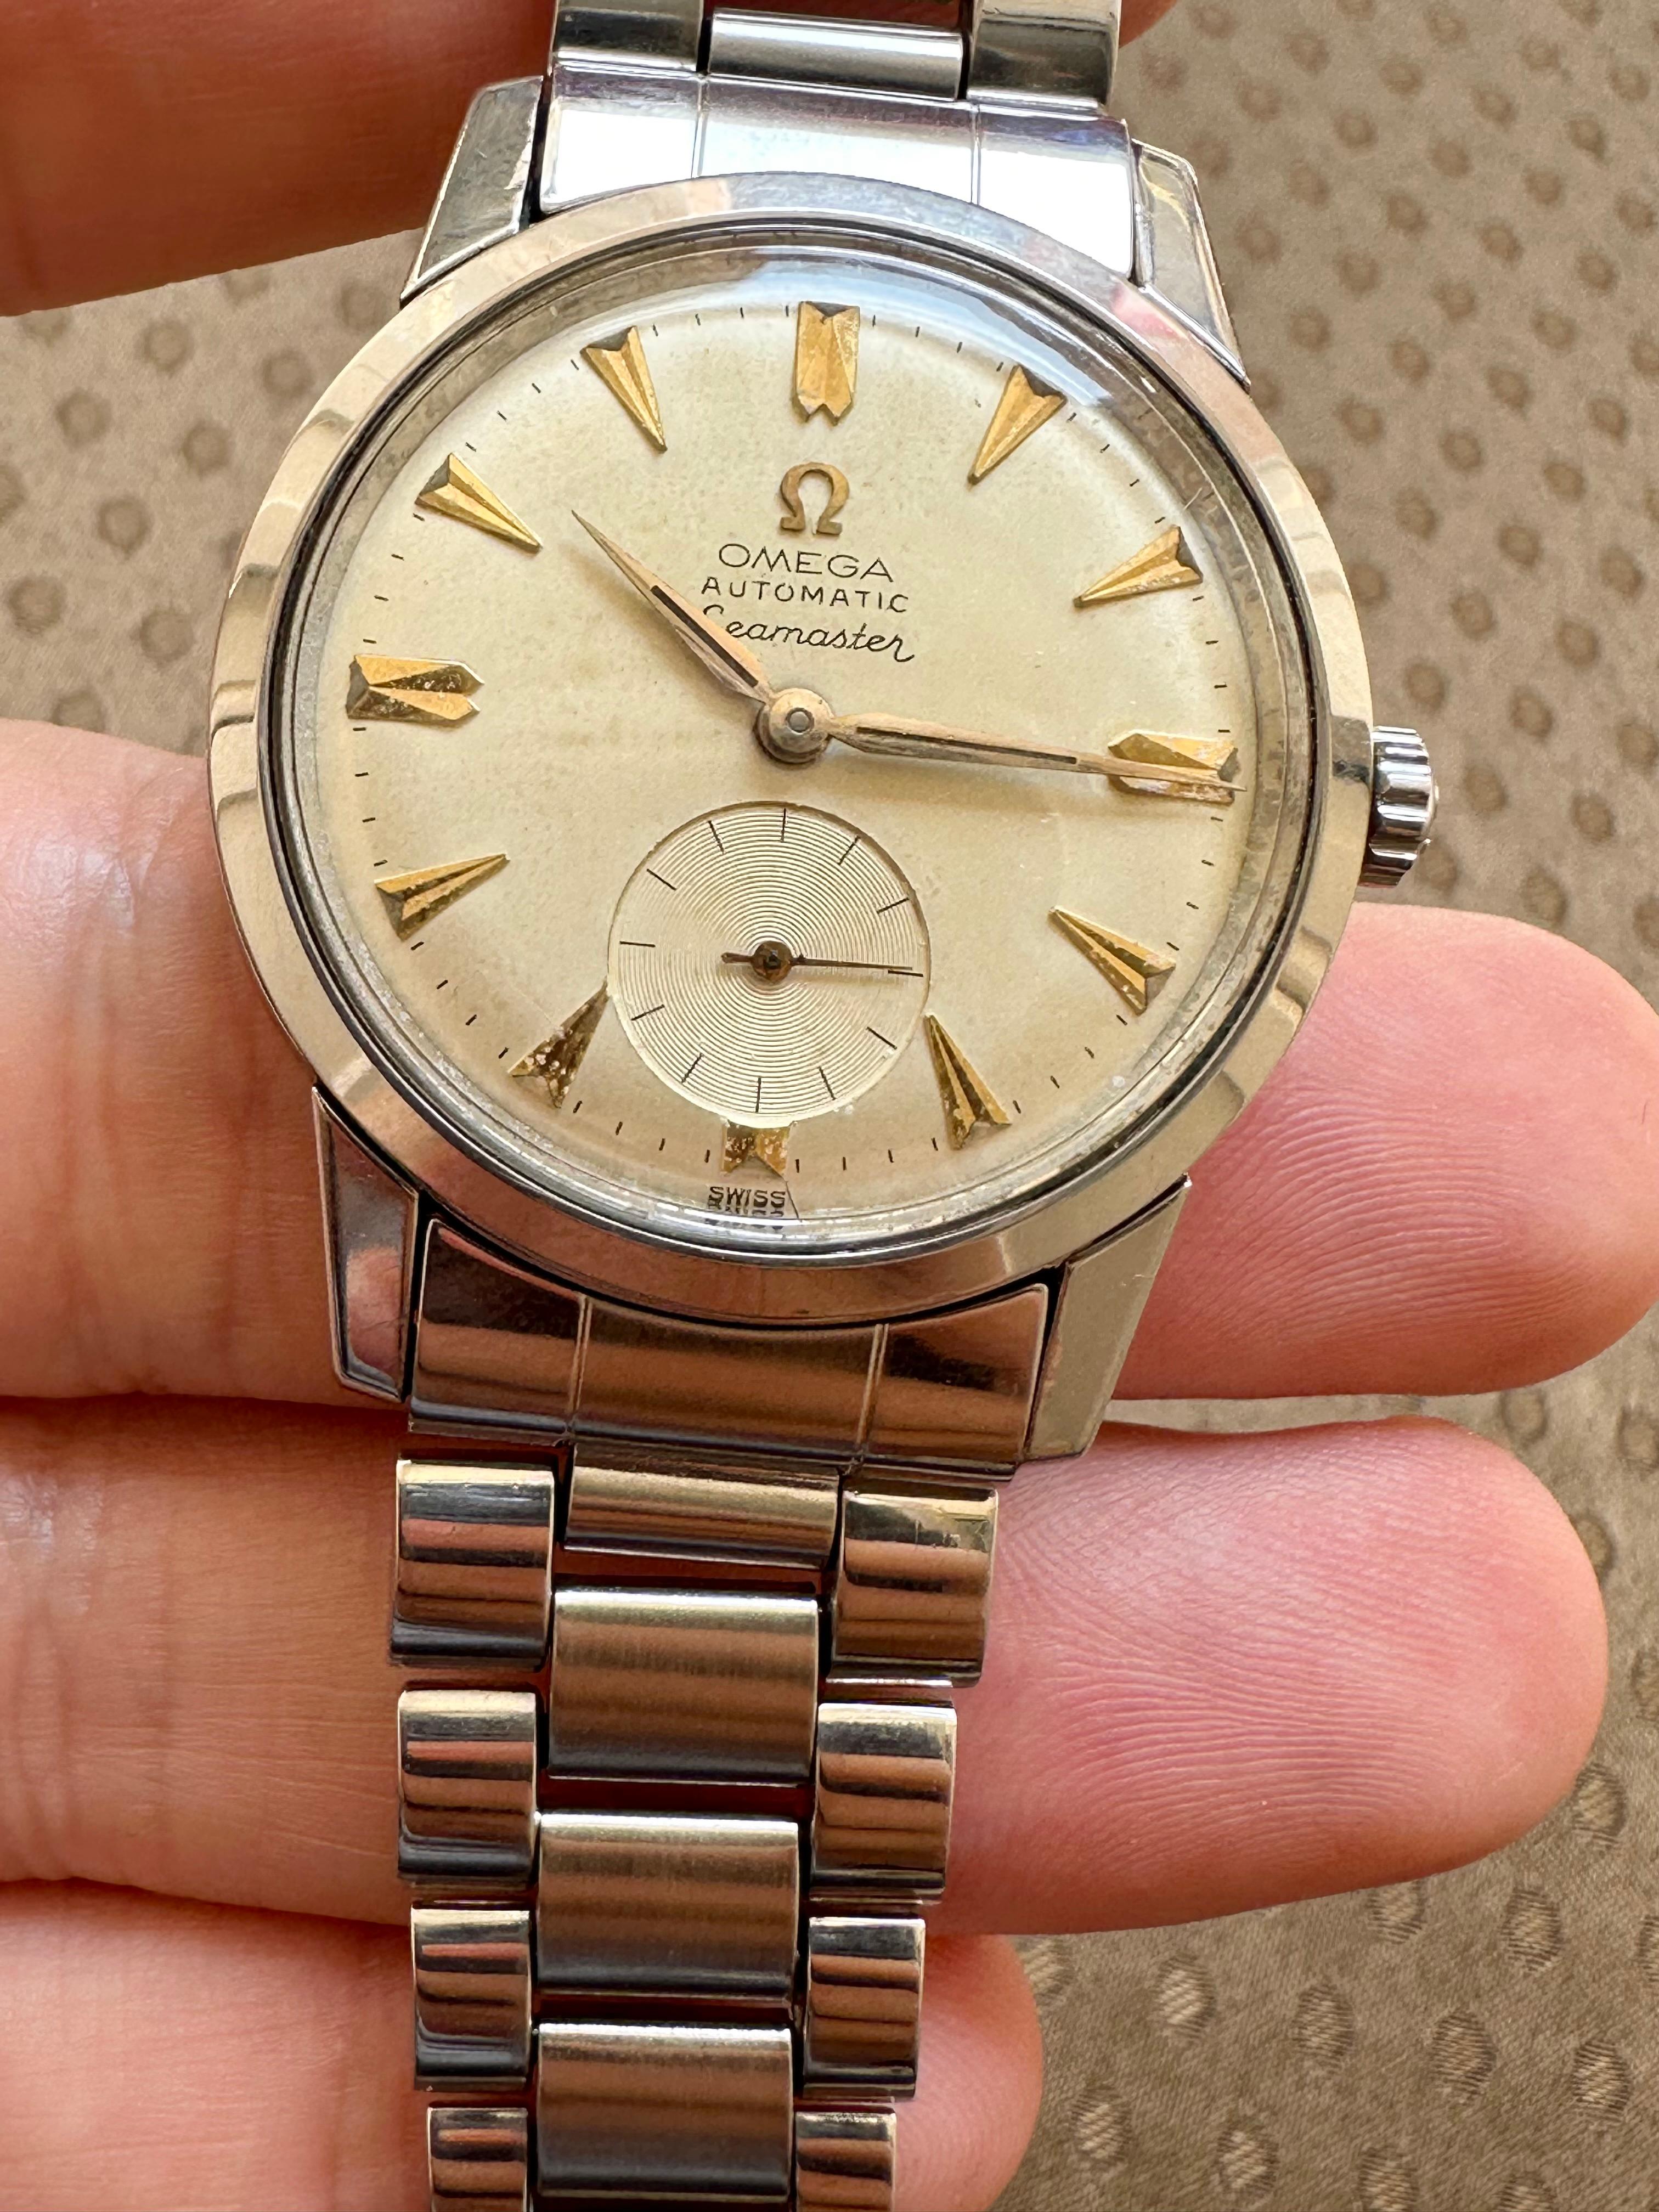 Brand: Omega

Model: Seamaster

Reference Number: 14767-61

Country Of Manufacture: Switzerland

Movement: Automatic

Case Material: Stainless steel

Measurements : Case width: 34 mm. (without crown)

Band Type : Stainless steel

Band Condition : In